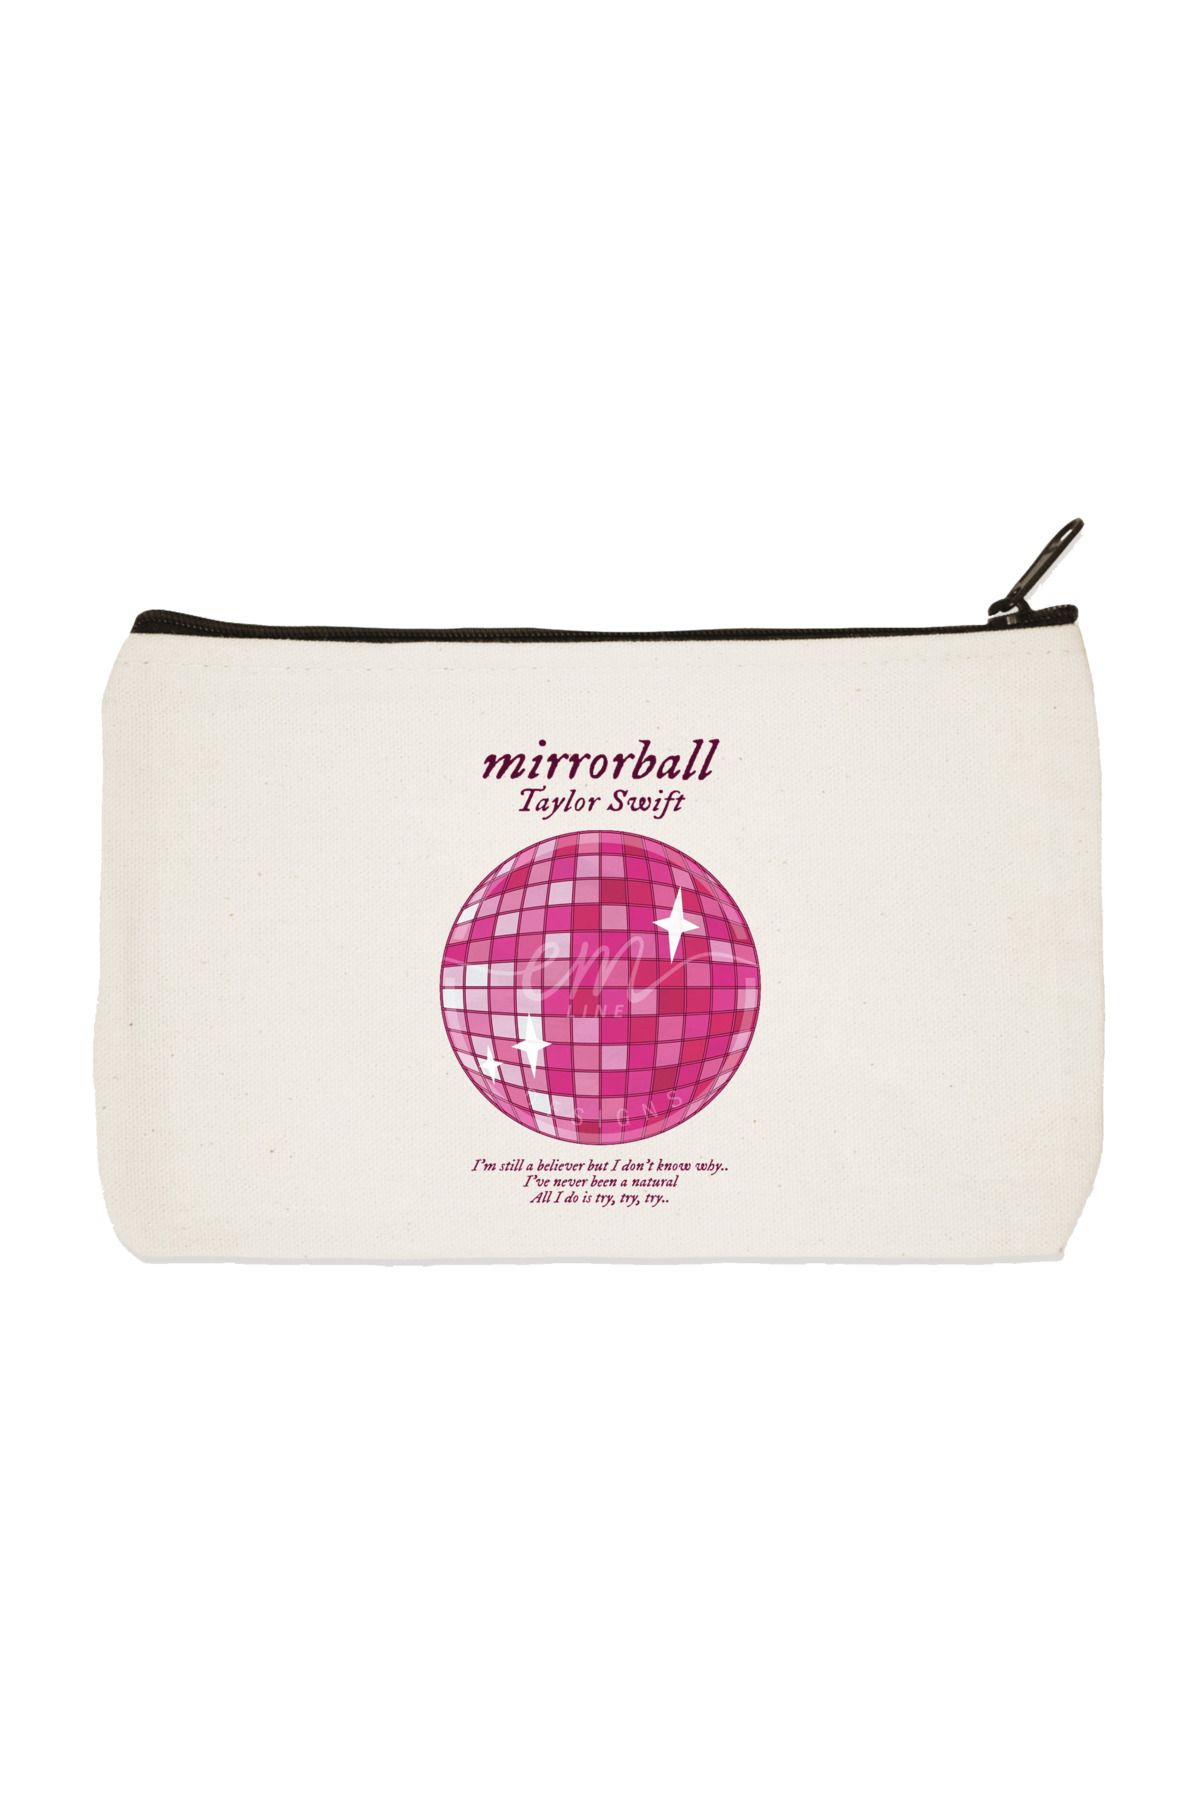 mirrorball swift taylor Backpack